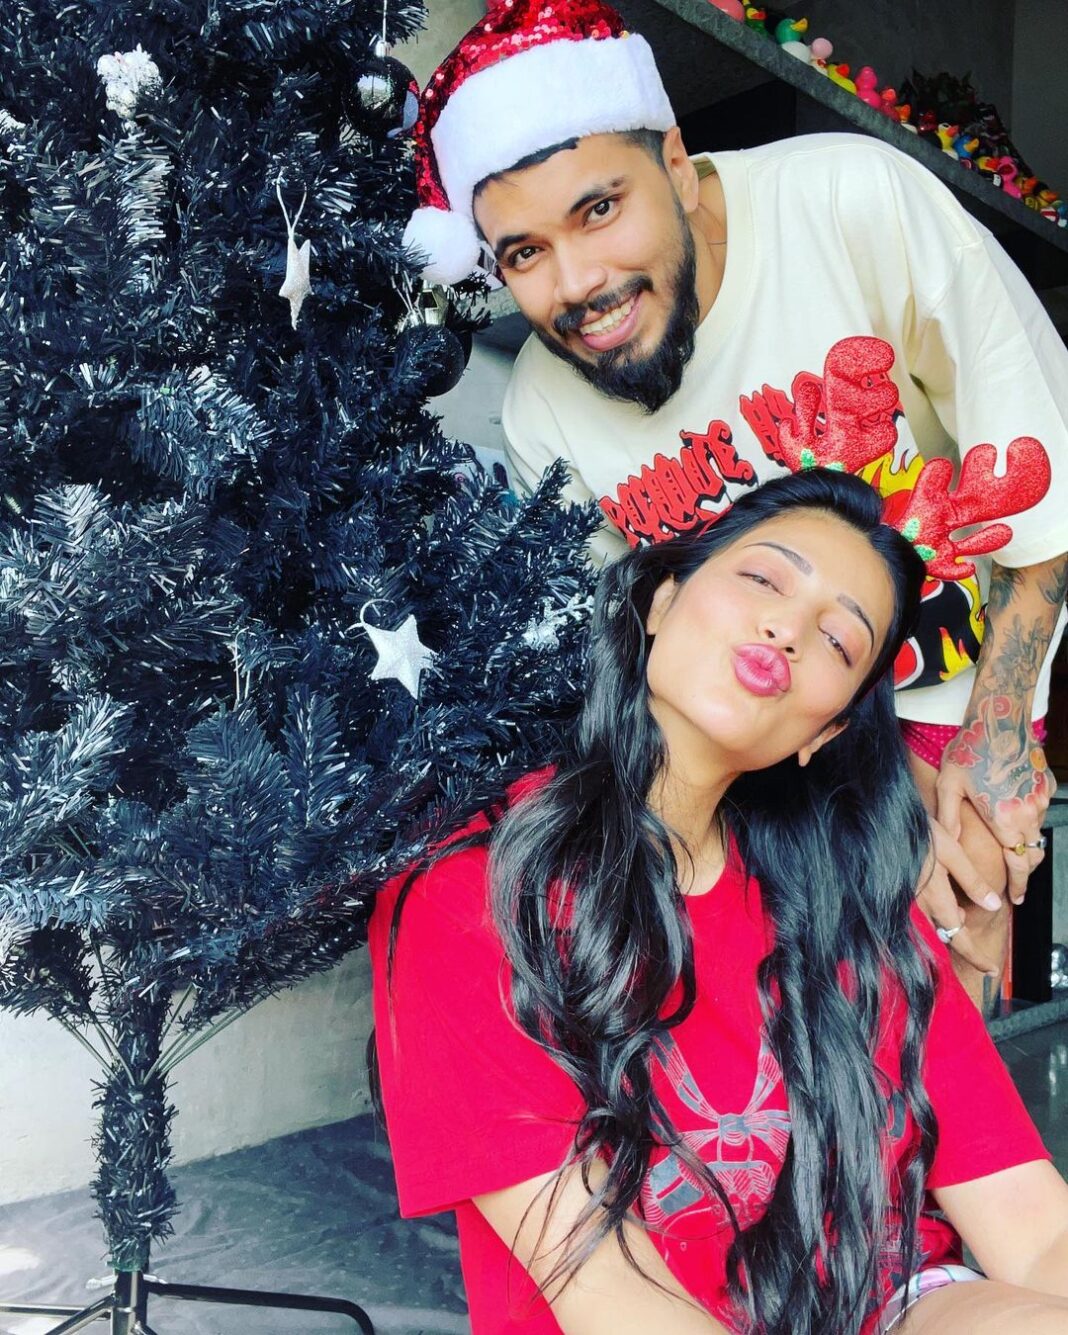 Shruti Haasan Instagram - Merry Christmas from us to you !!! We’ve had a weird x mas day putting up our black tree on Christmas Day cause we’ve both been so busy travelling and working and we are so thankful for the life we have … this x mas let’s take a second to be truly grateful for the family and friends that took us through the rough and the beautiful days ❤️🎄 merry x mas to you and yours and we send you giant squishy hugs